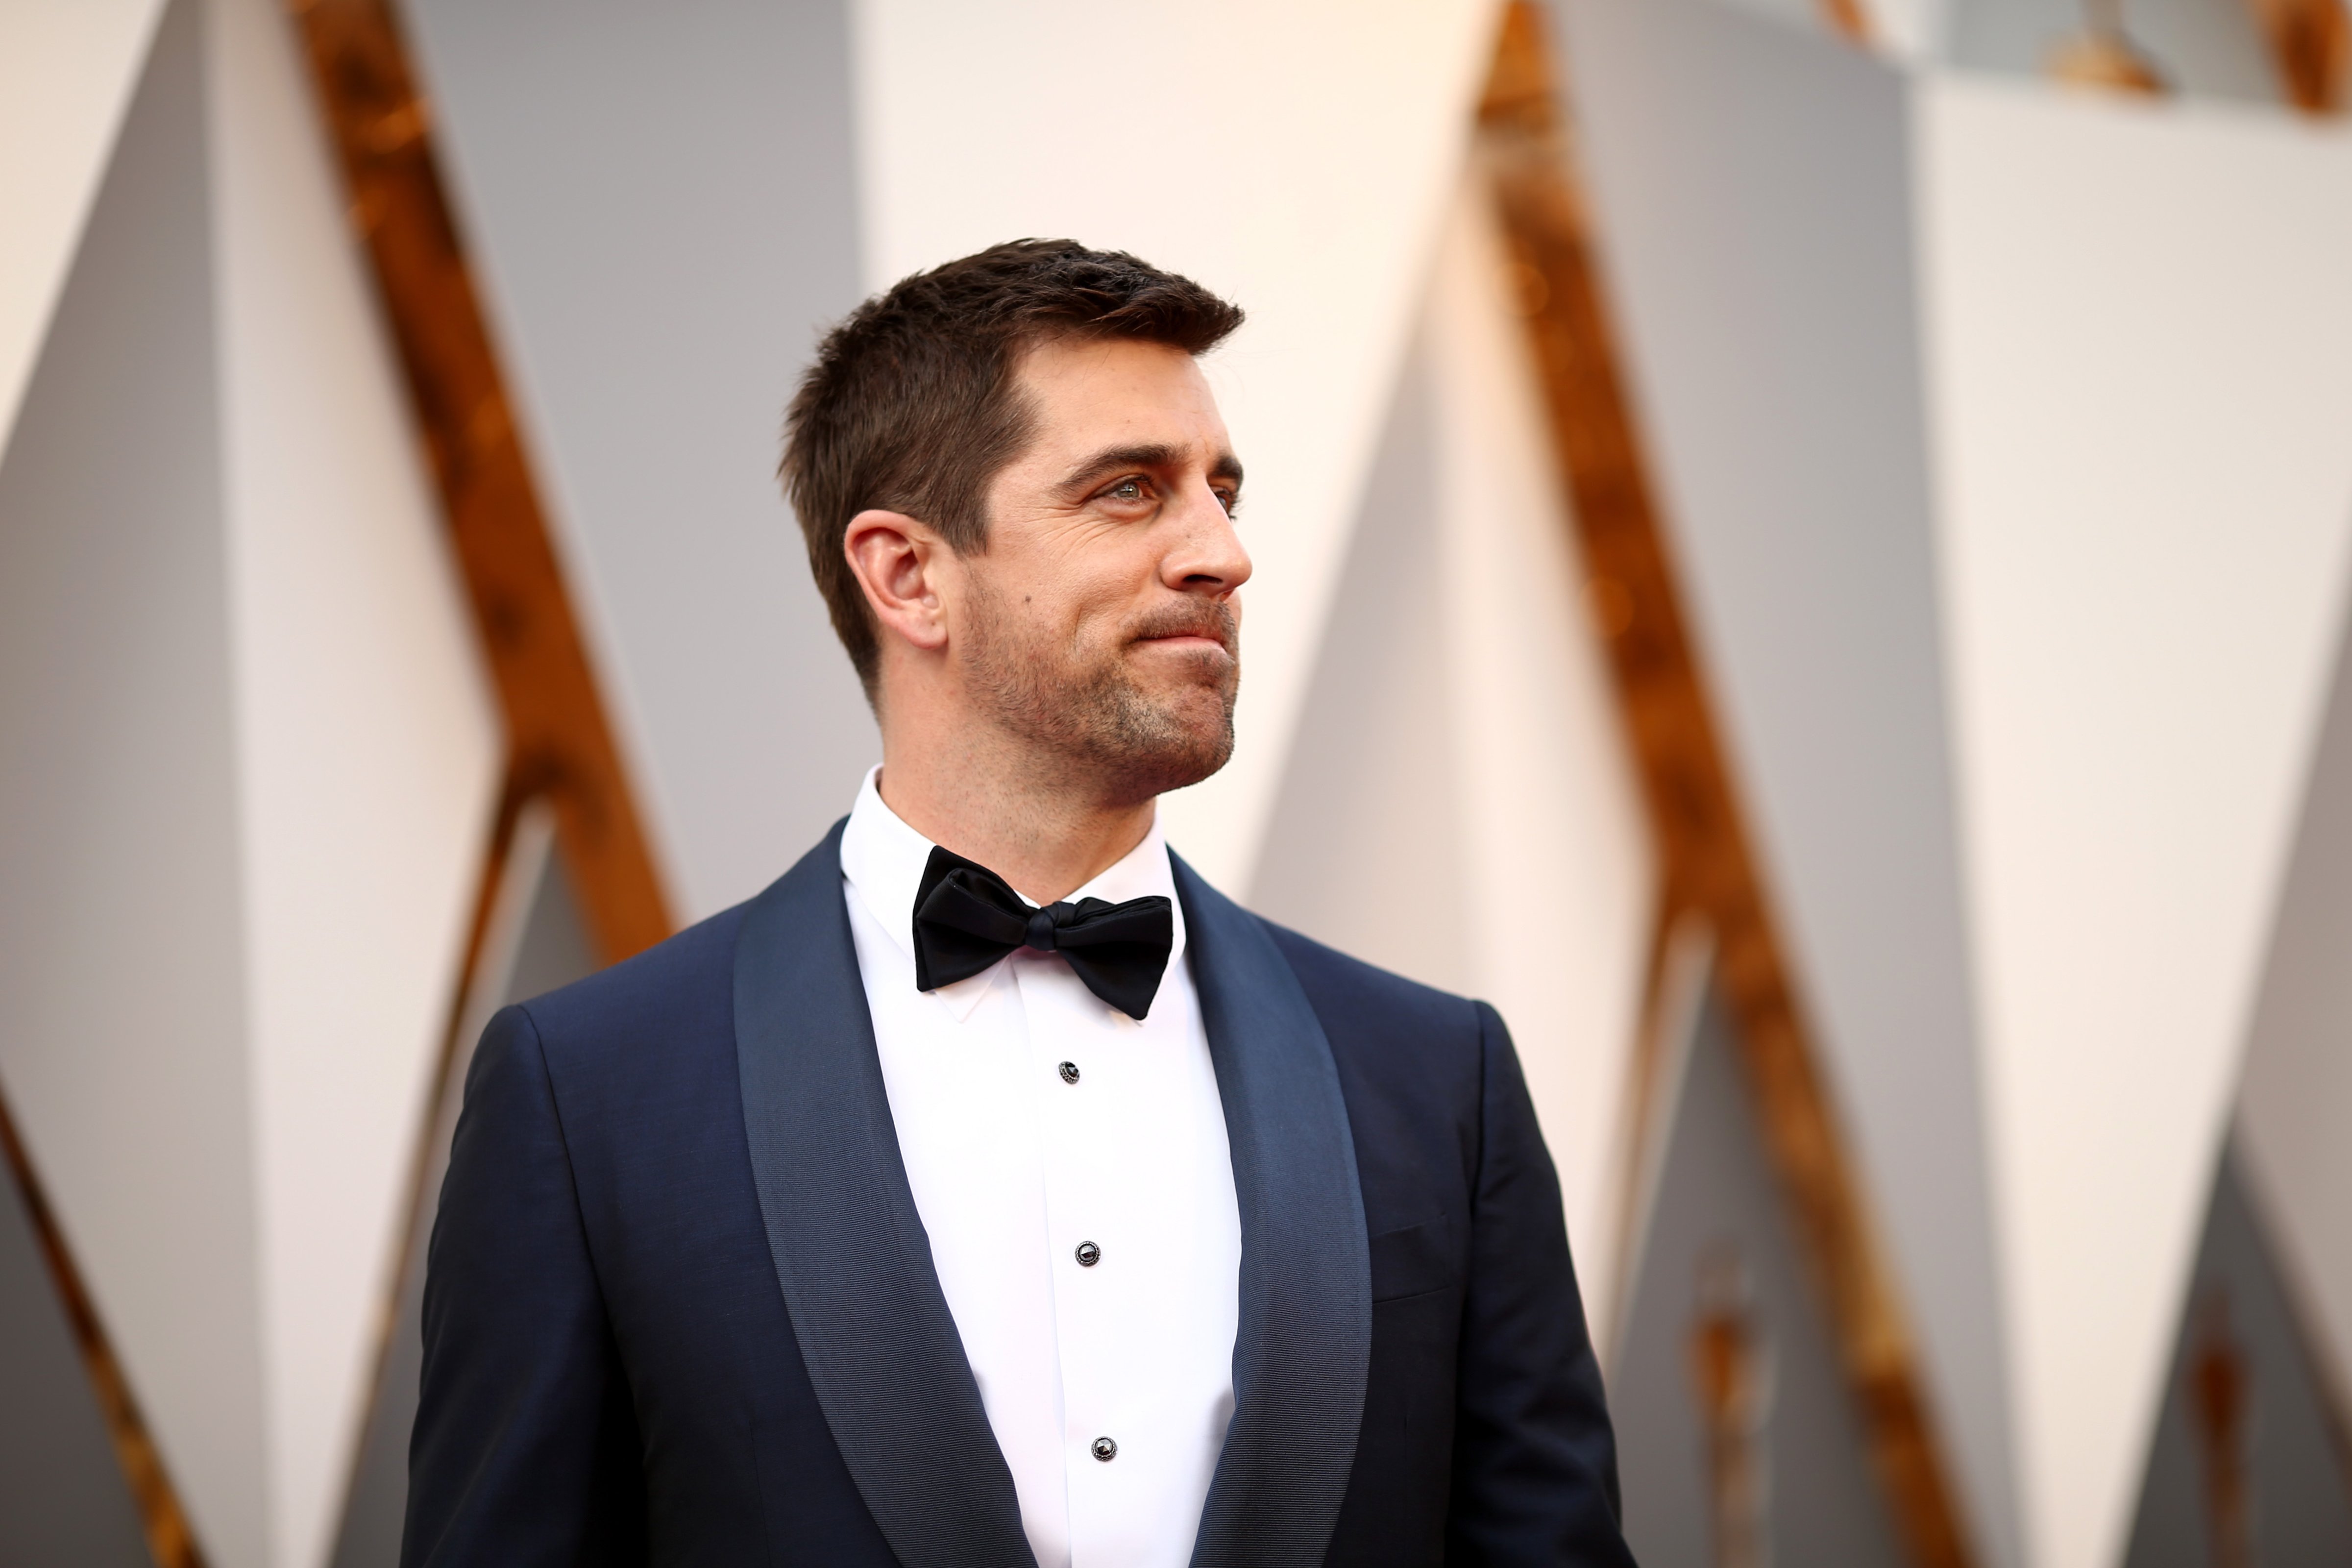 Rodgers at the Academy Awards Ceremony this year. (Christopher Polk— Getty Images)